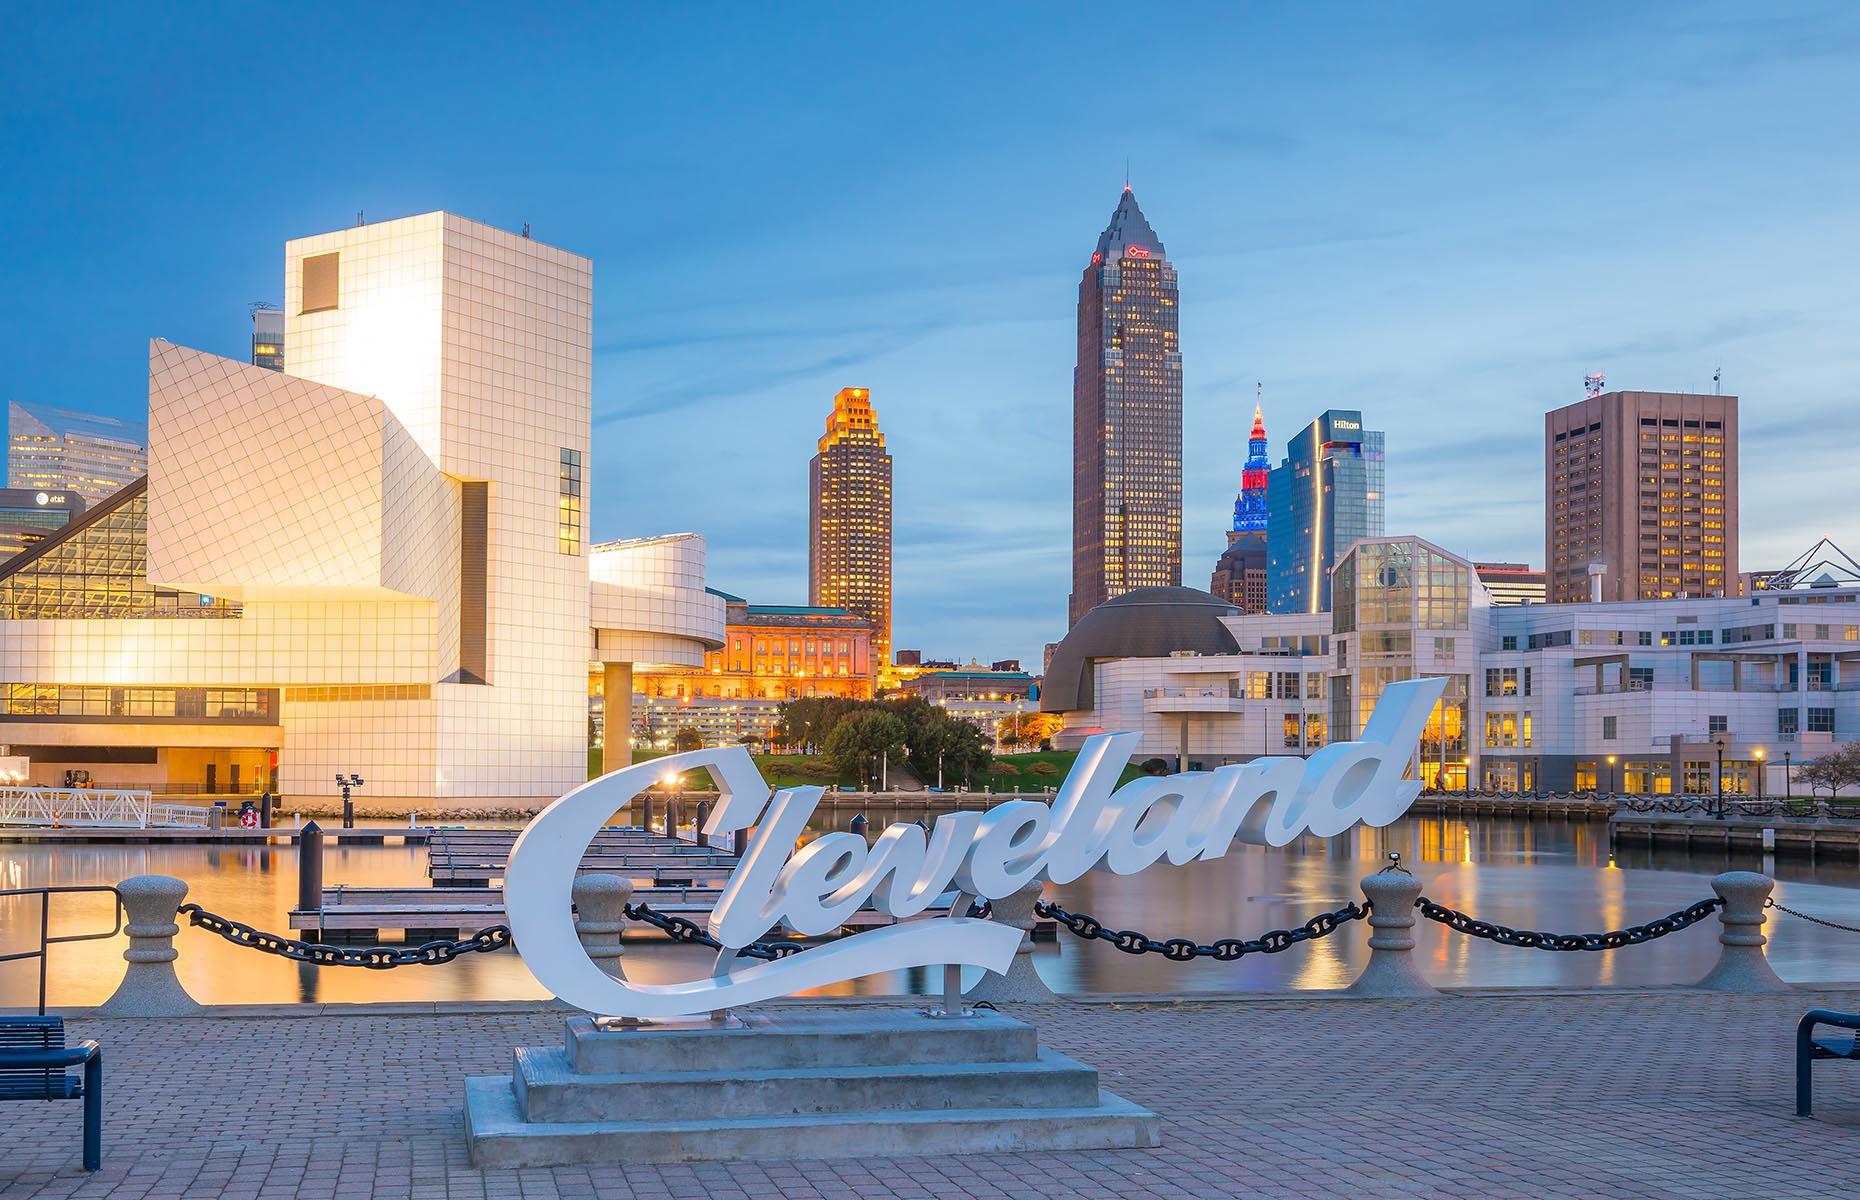 <p>The lakefront city of <a href="https://www.loveexploring.com/guides/91489/explore-cleveland-the-top-things-to-do-where-to-stay-what-to-eat">Cleveland</a> is an often overlooked destination and wrongly so. With a creative culinary scene, a range of new hotels and a walkable downtown area, it’s easy to drop your bags and begin exploring instantly. Highlights include the world’s only <a href="https://www.rockhall.com/">Rock & Roll Hall of Fame</a>, free <a href="https://www.clevelandart.org/">Cleveland Museum of Art</a>, with a collection of 45,000 pieces, and the newly redeveloped entertainment and dining hub of <a href="http://flatseastbank.com/">Flats East Bank</a>. Check <a href="https://www.thisiscleveland.com/travel-update">the latest travel advice and updates here</a>.</p>